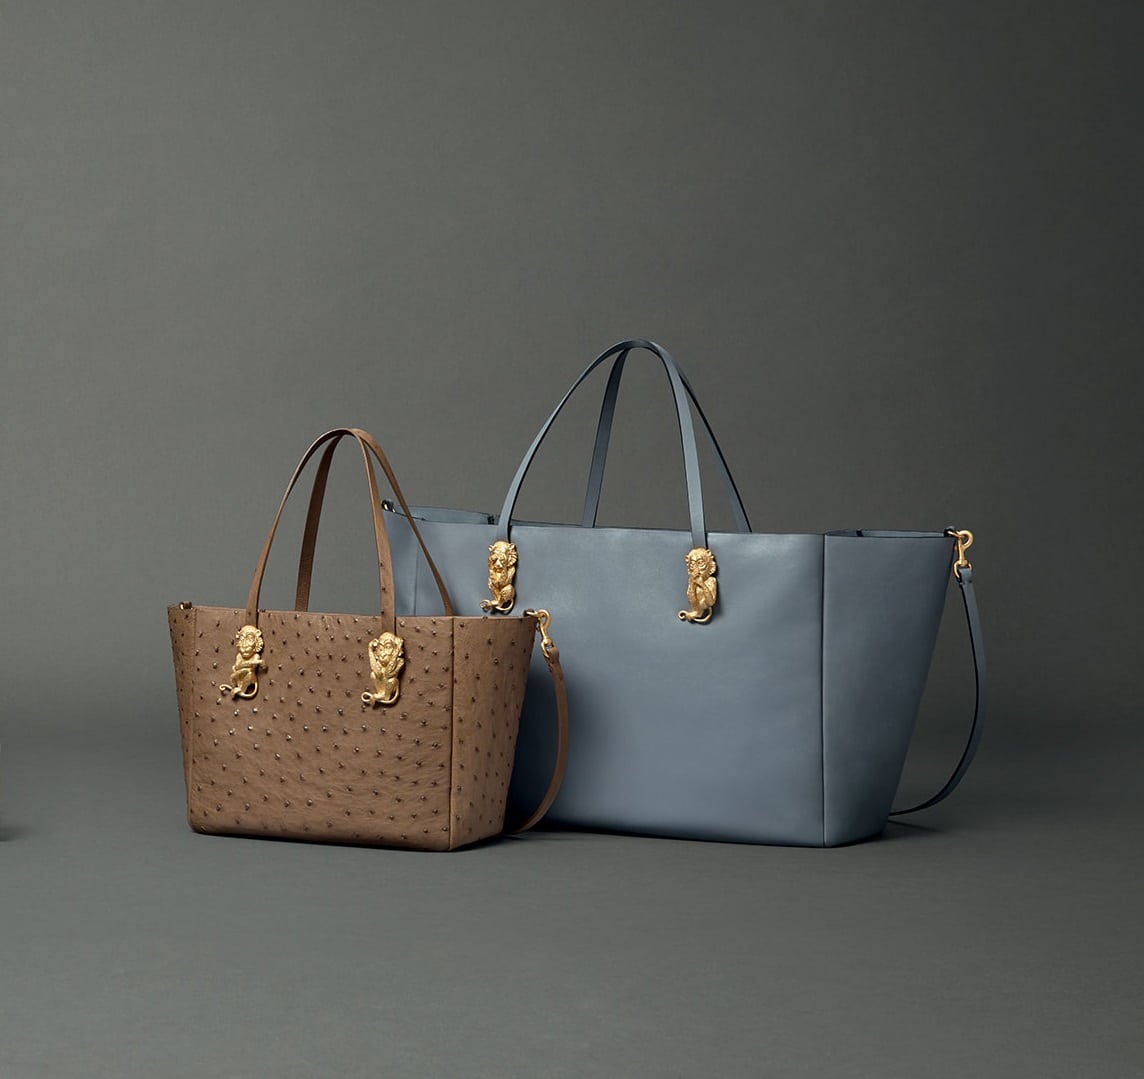 Valentino 2014 Bag and Accessory Full Lookbook Collection - Spotted Fashion